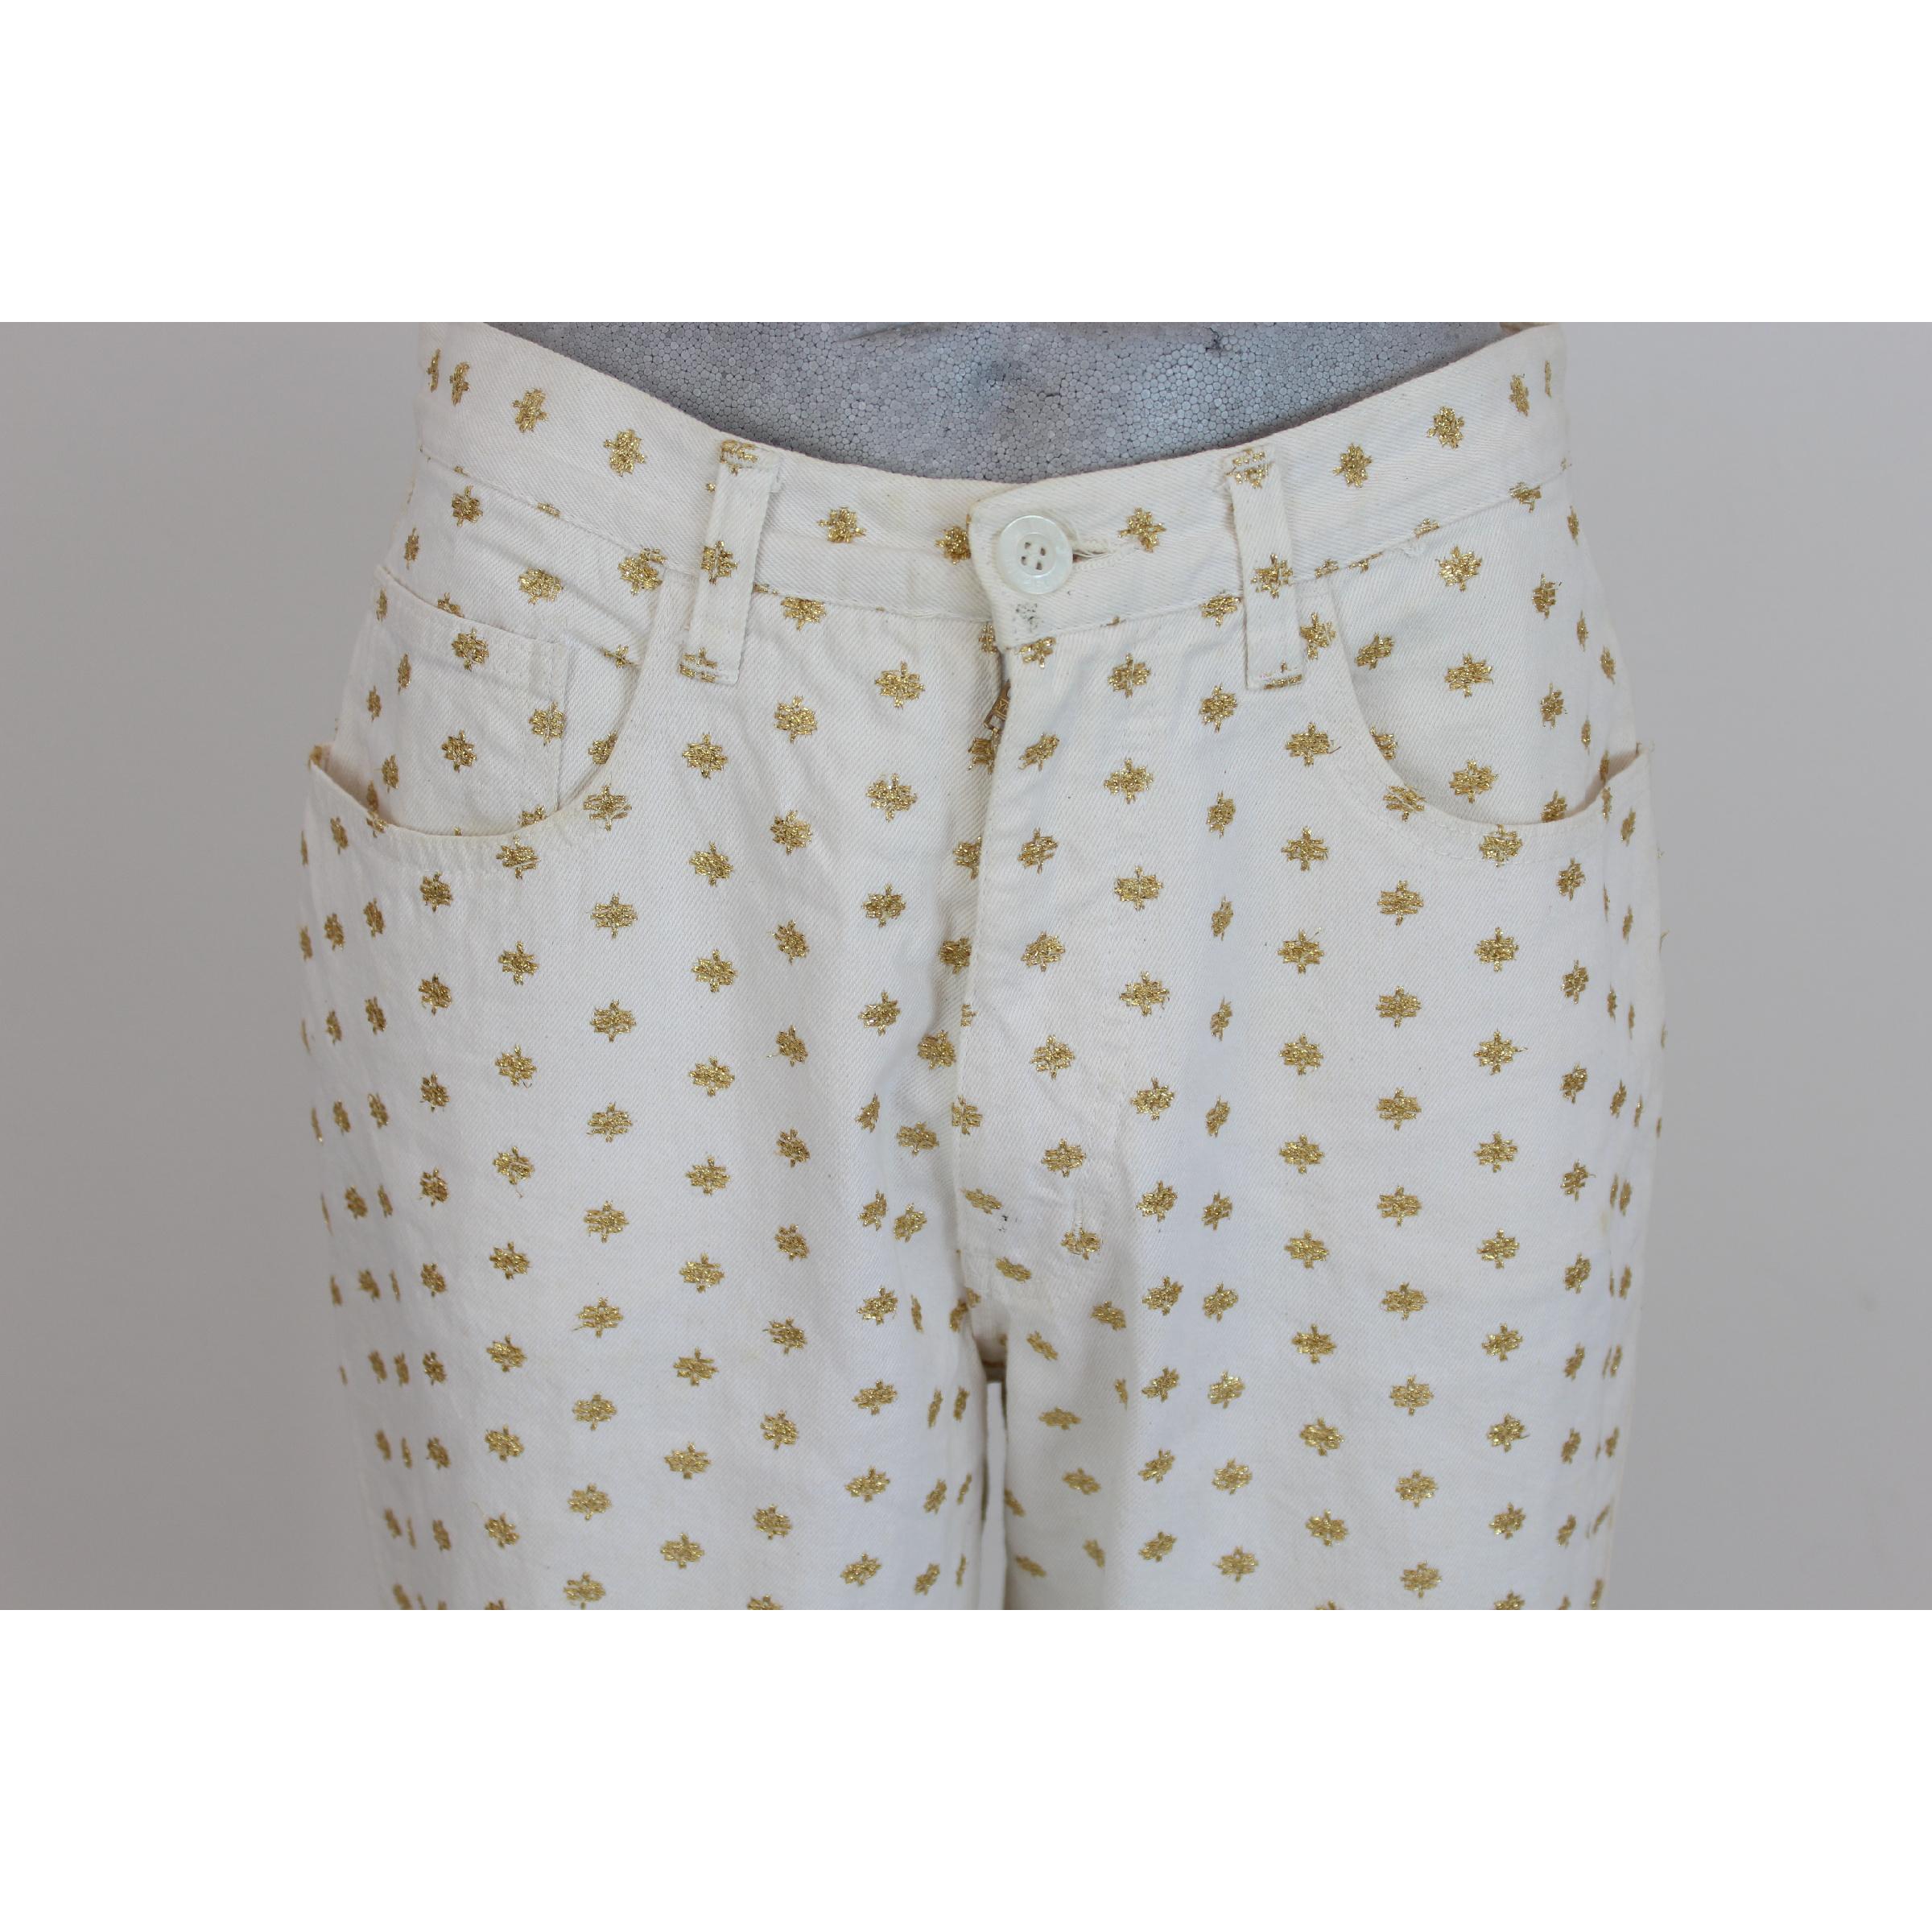 Moschino trousers like jeans, white with golden patterns, 100% cotton. Pockets on the sides. Good vintage condition. Made in Italy.

Size 46 It 14 Us 12 Uk

Trouser length: 103 cm
Pant waist: 36 cm
Hem: 15 cm